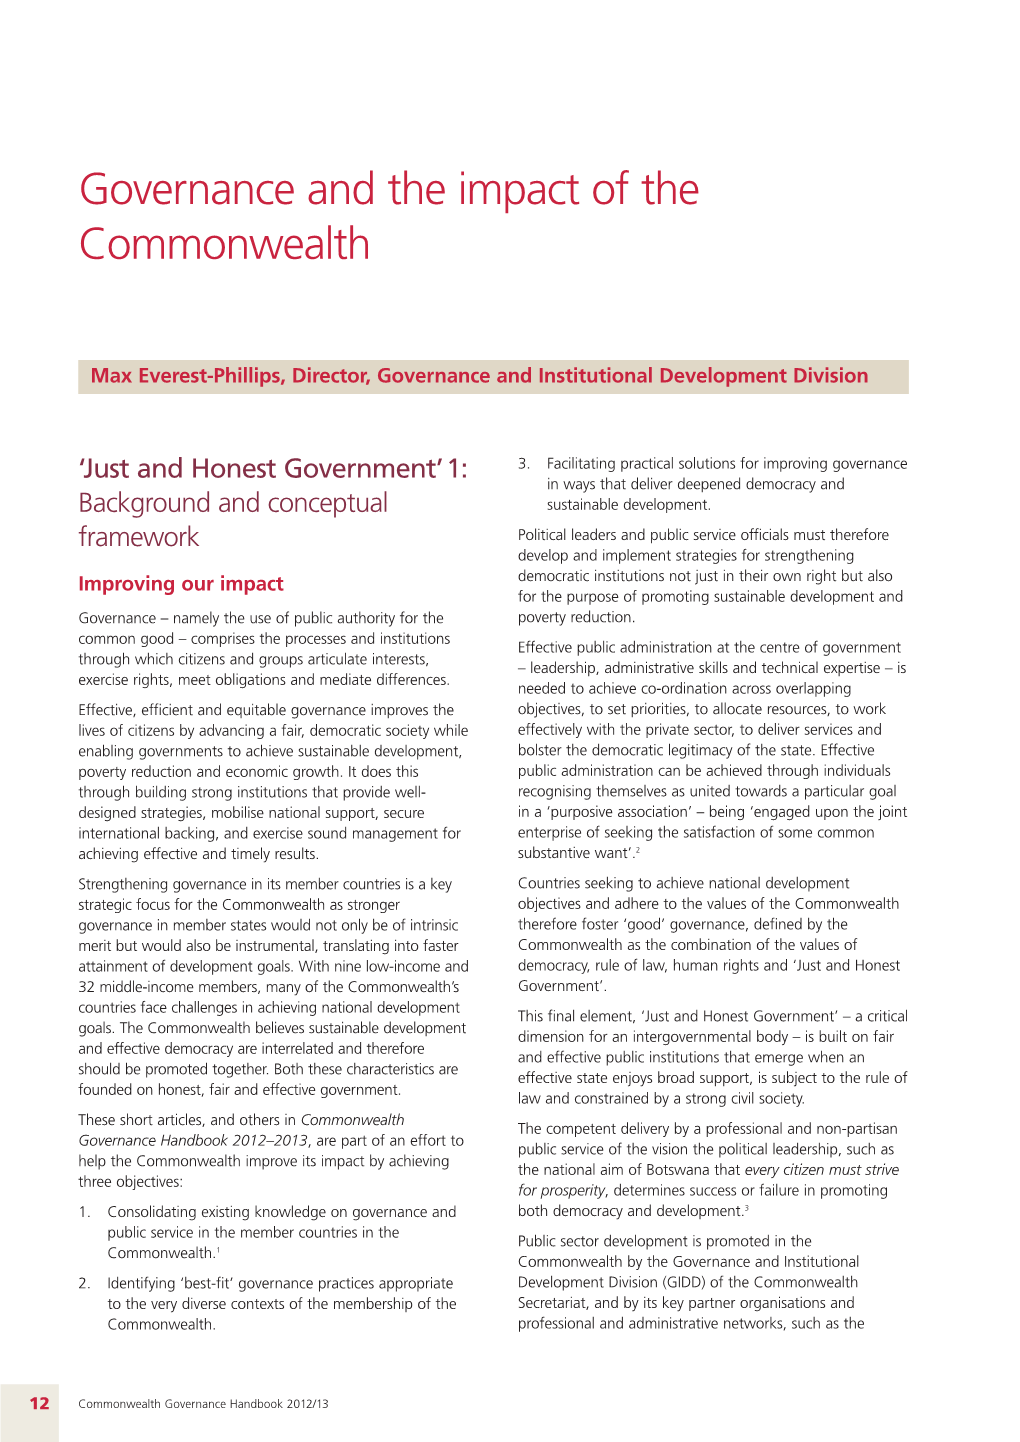 Governance and the Impact of the Commonwealth